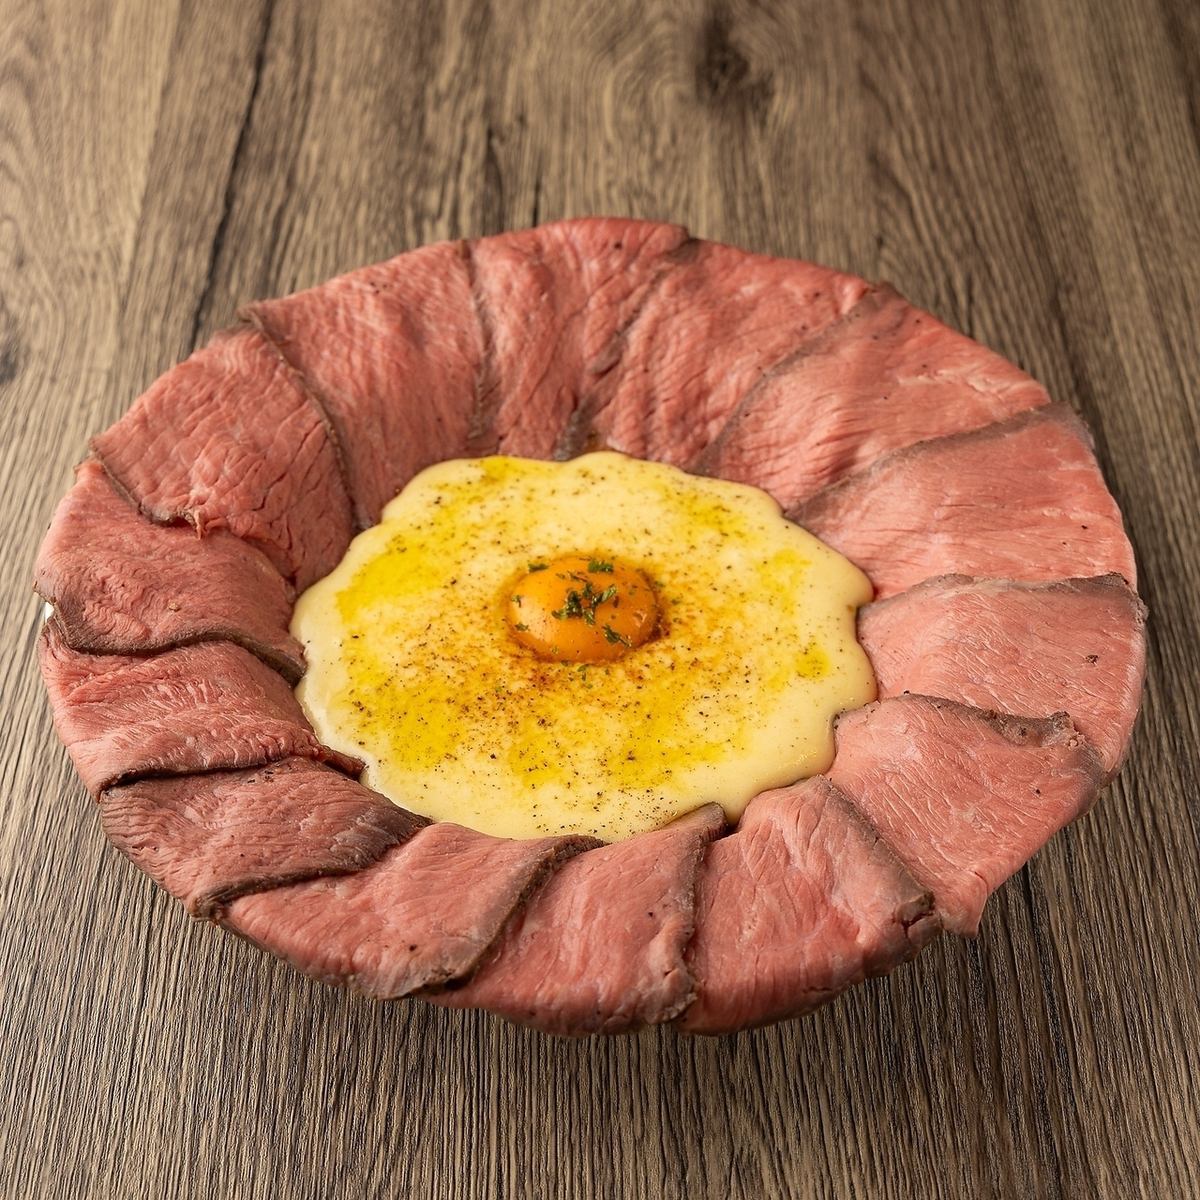 ★Hanabata Farm Raclette Cheese x Meat★Delicious meat and cheese shop